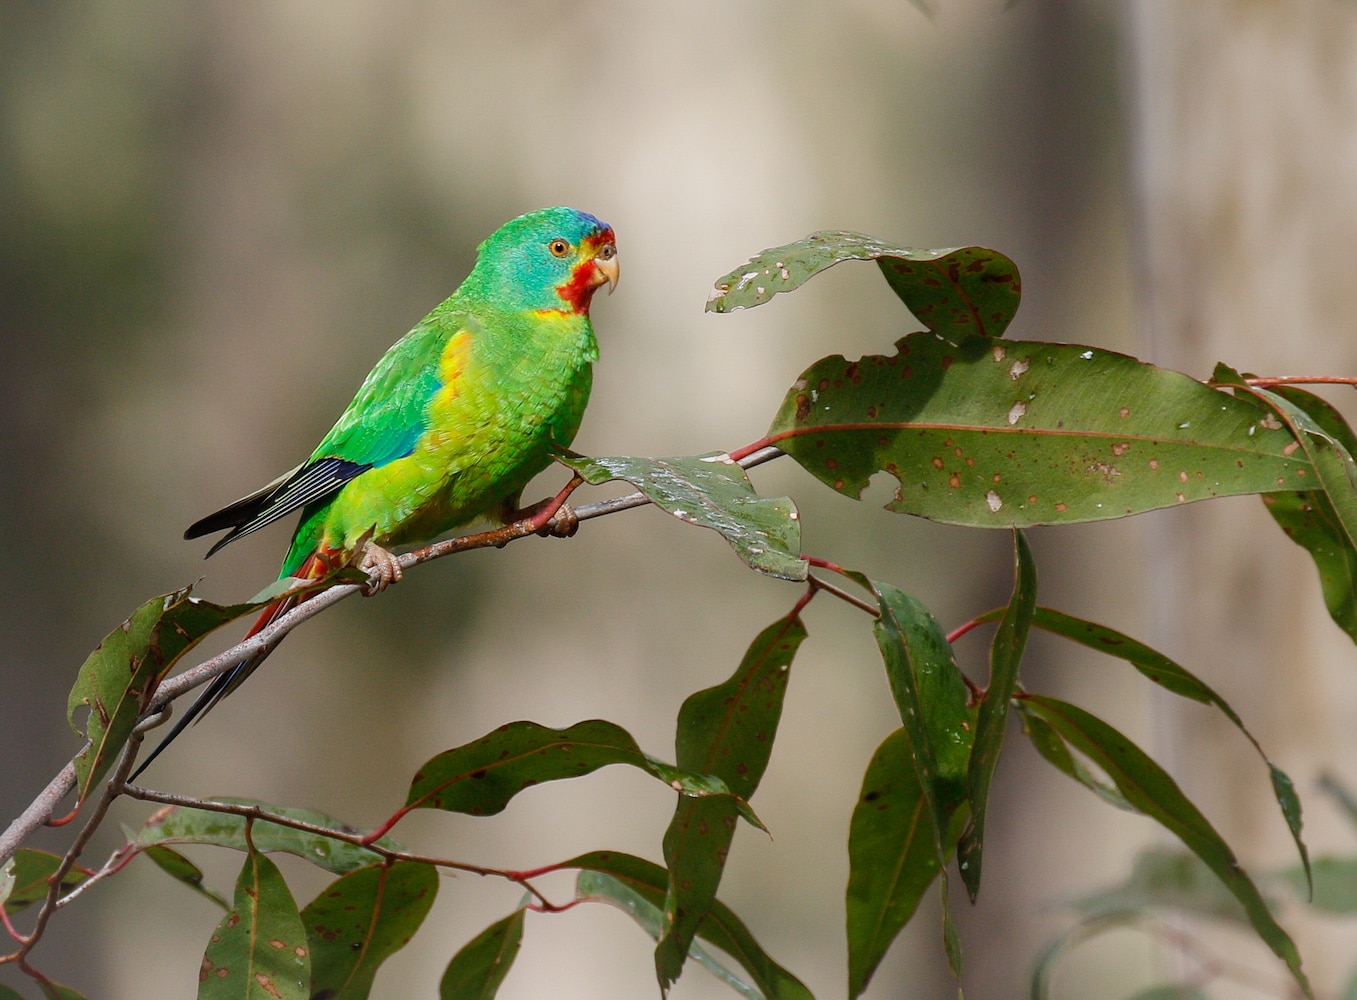 Swift Parrot - Perched - Mick Roderick